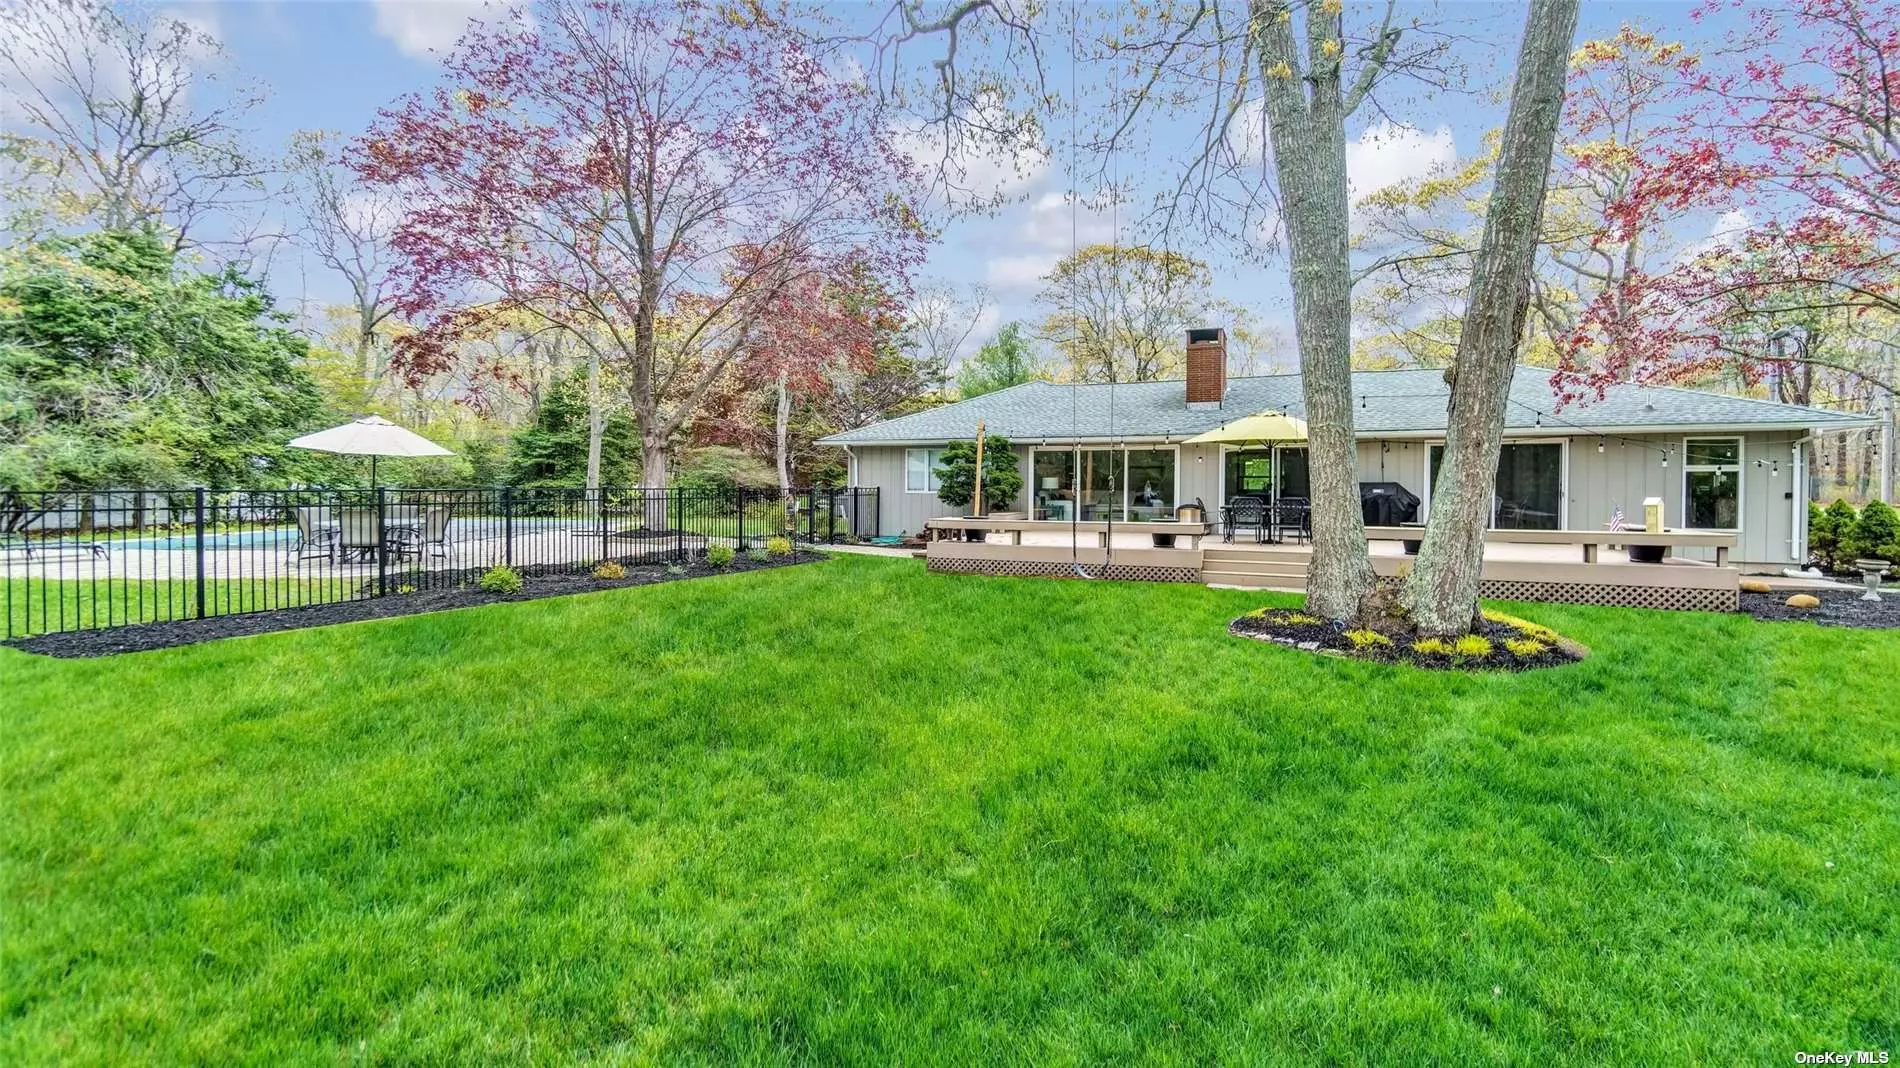 Fabulous for Summer Before it&rsquo;s too late, grab this cutie for June or the last to weeks of August! Fabulous vibe in this East Quogue Summer House, expansive deck and beautiful patio and IG pool area...You will be comfy and close to the beach and all the Hamptons has to offer!